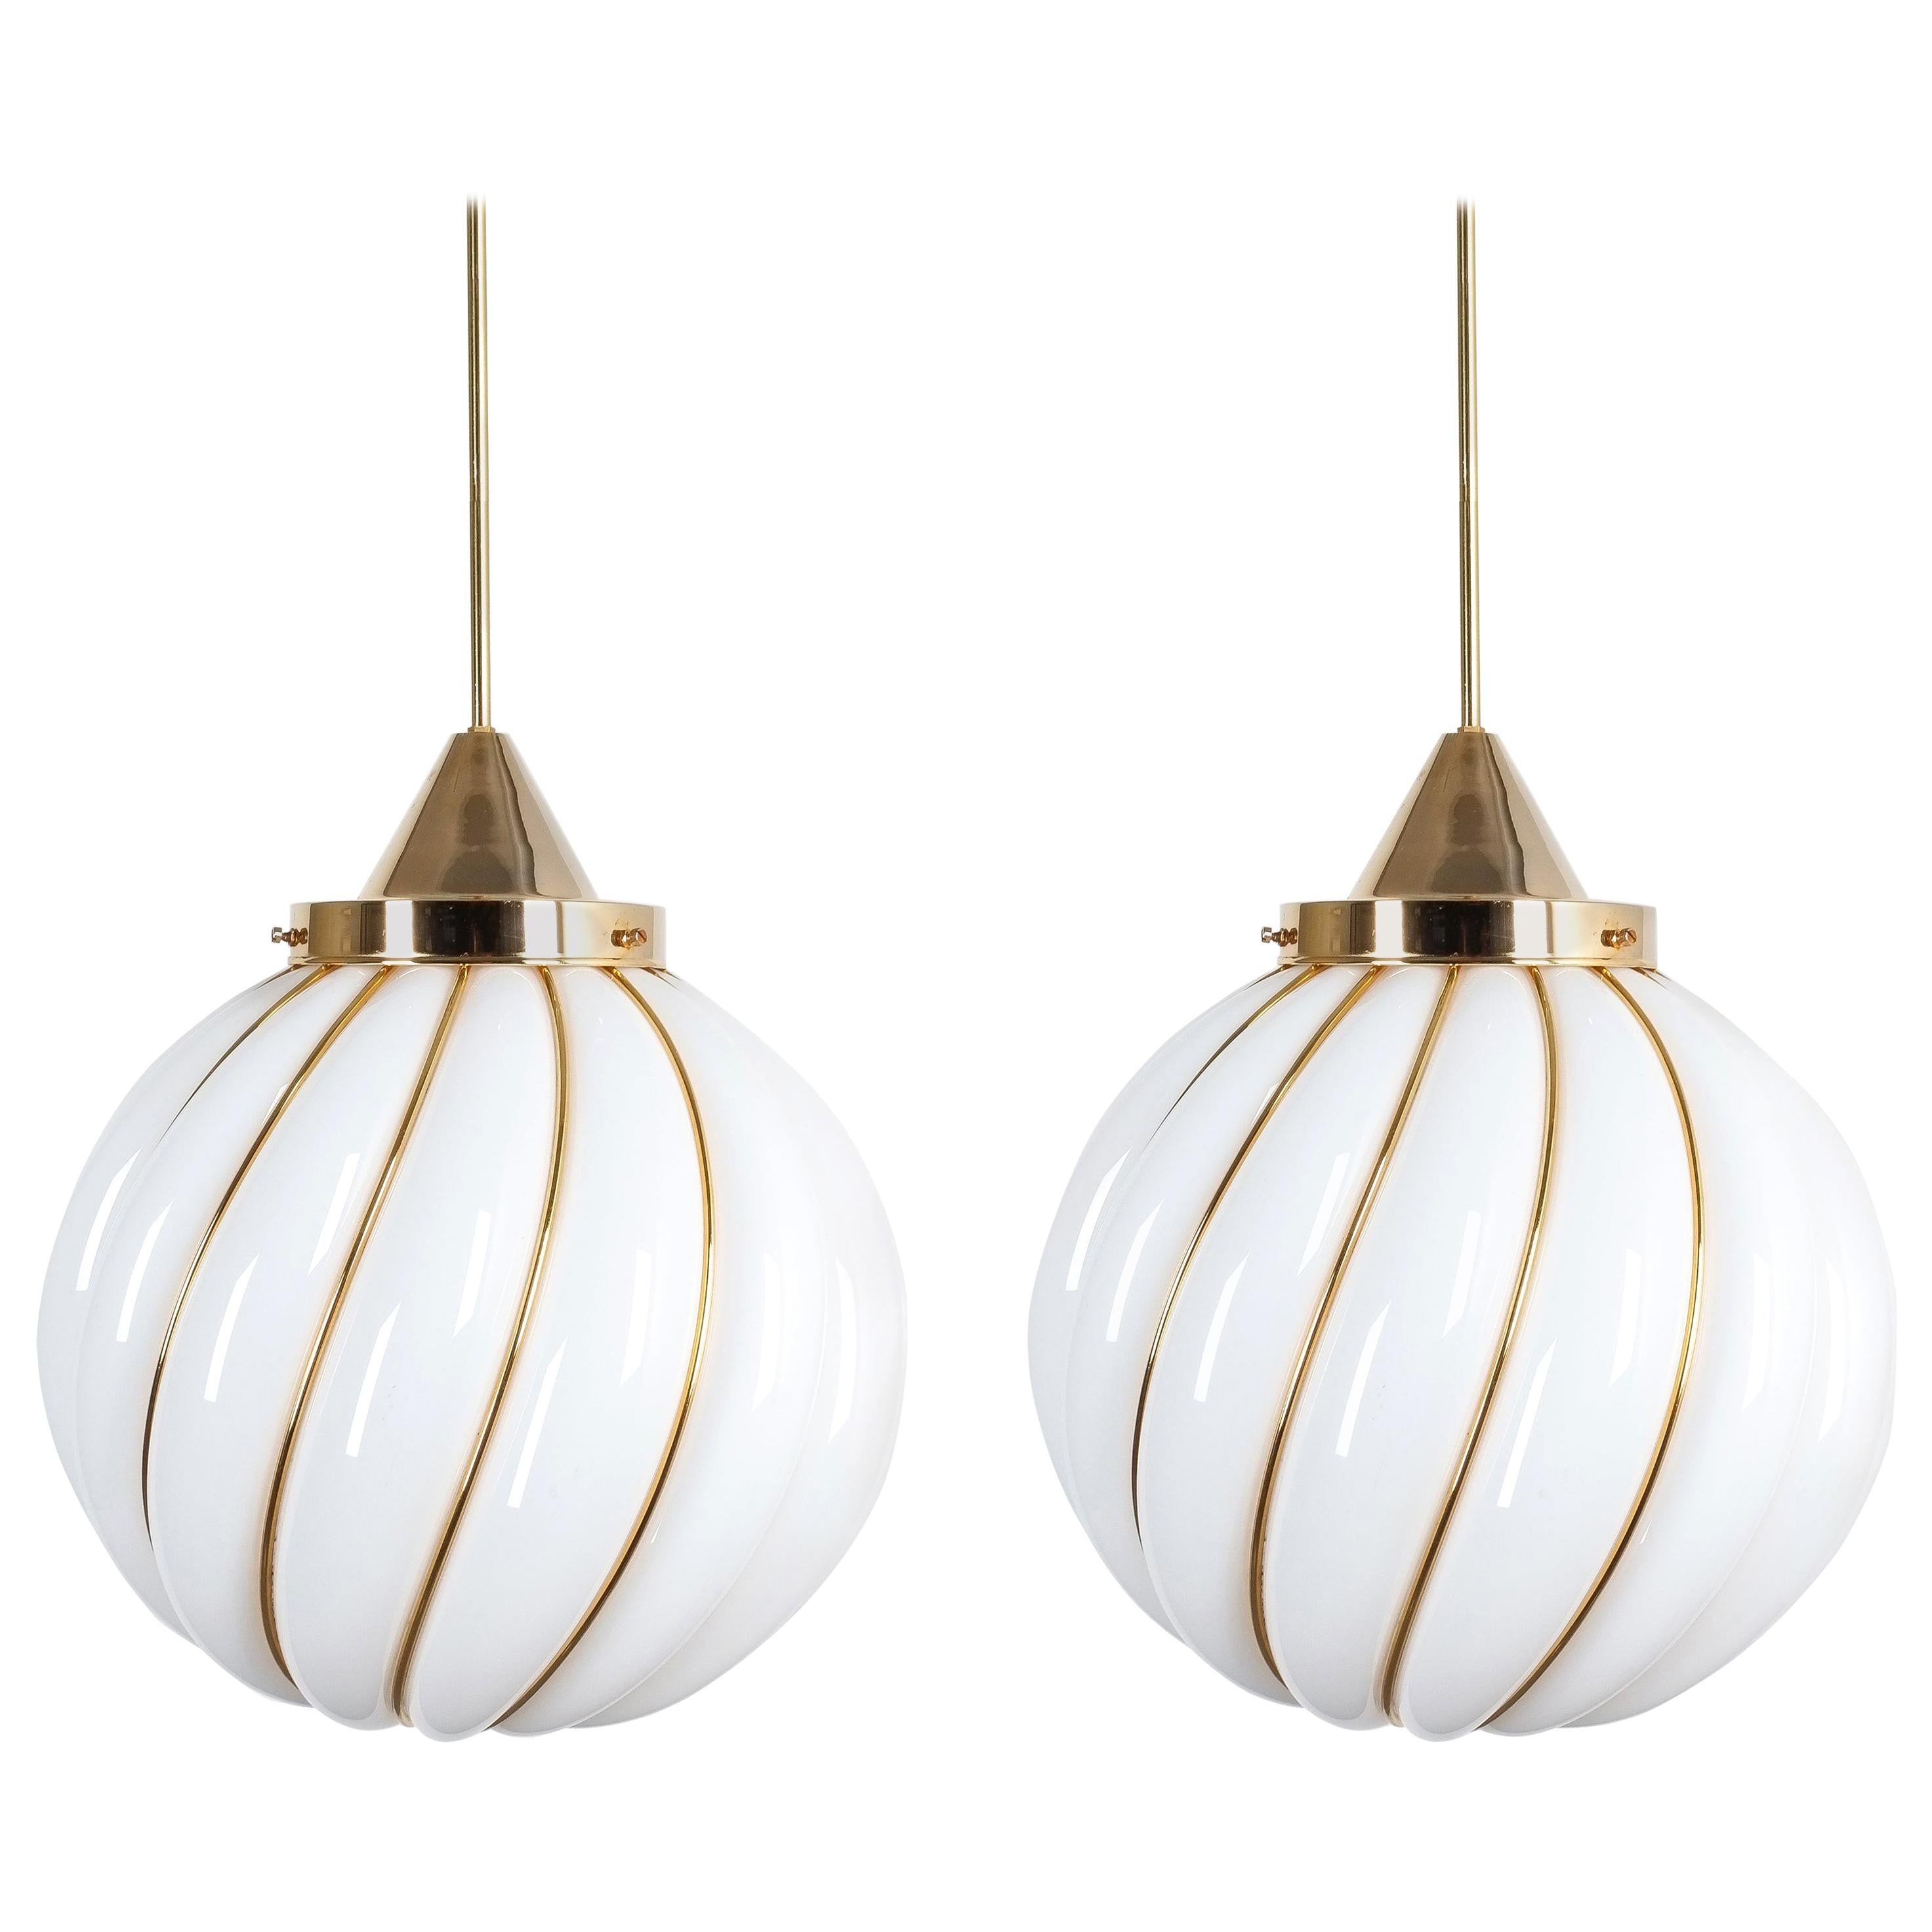 Pair of Adolf Loos Pendant Lamps for VeArt Opal Glass Gold, circa 1960